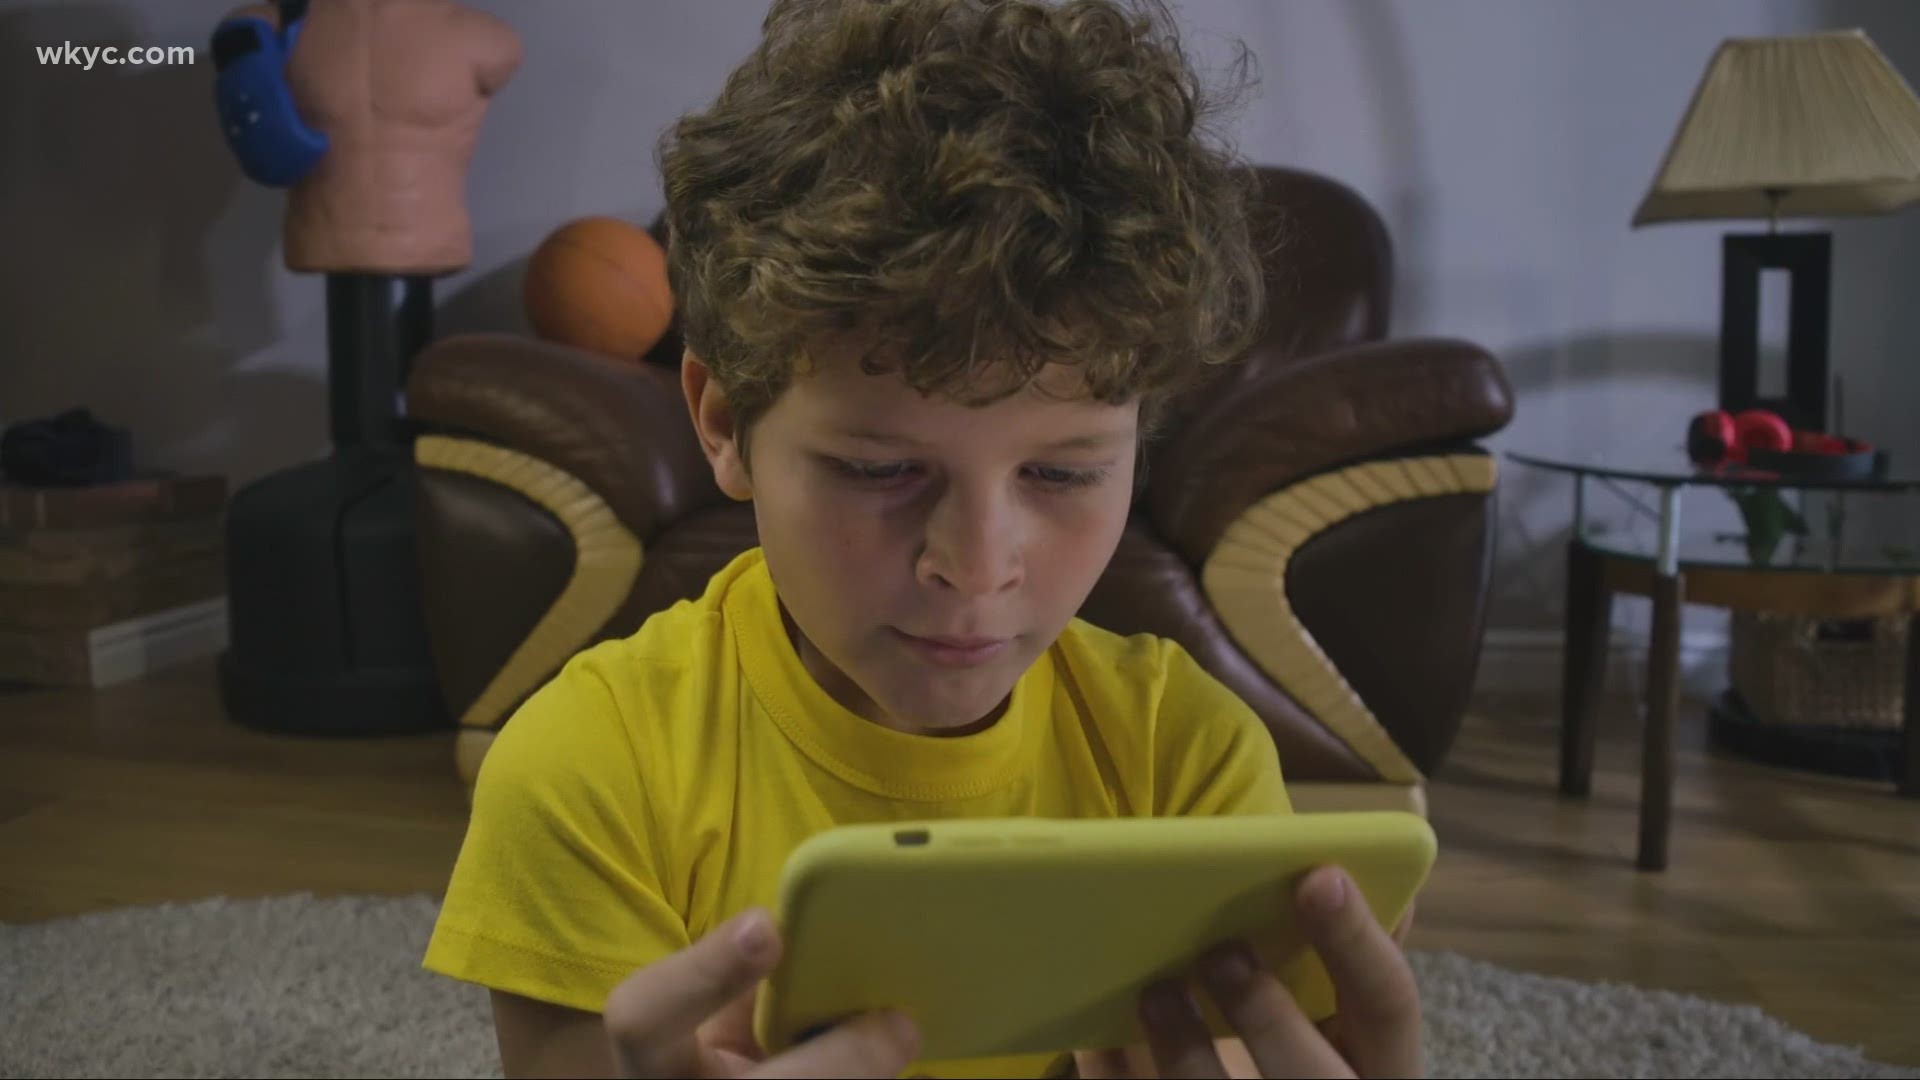 Jan. 18, 2021: What should parents know about their children spending time on social media pages? Here's what a Cleveland Clinic pediatric psychologist had to say.